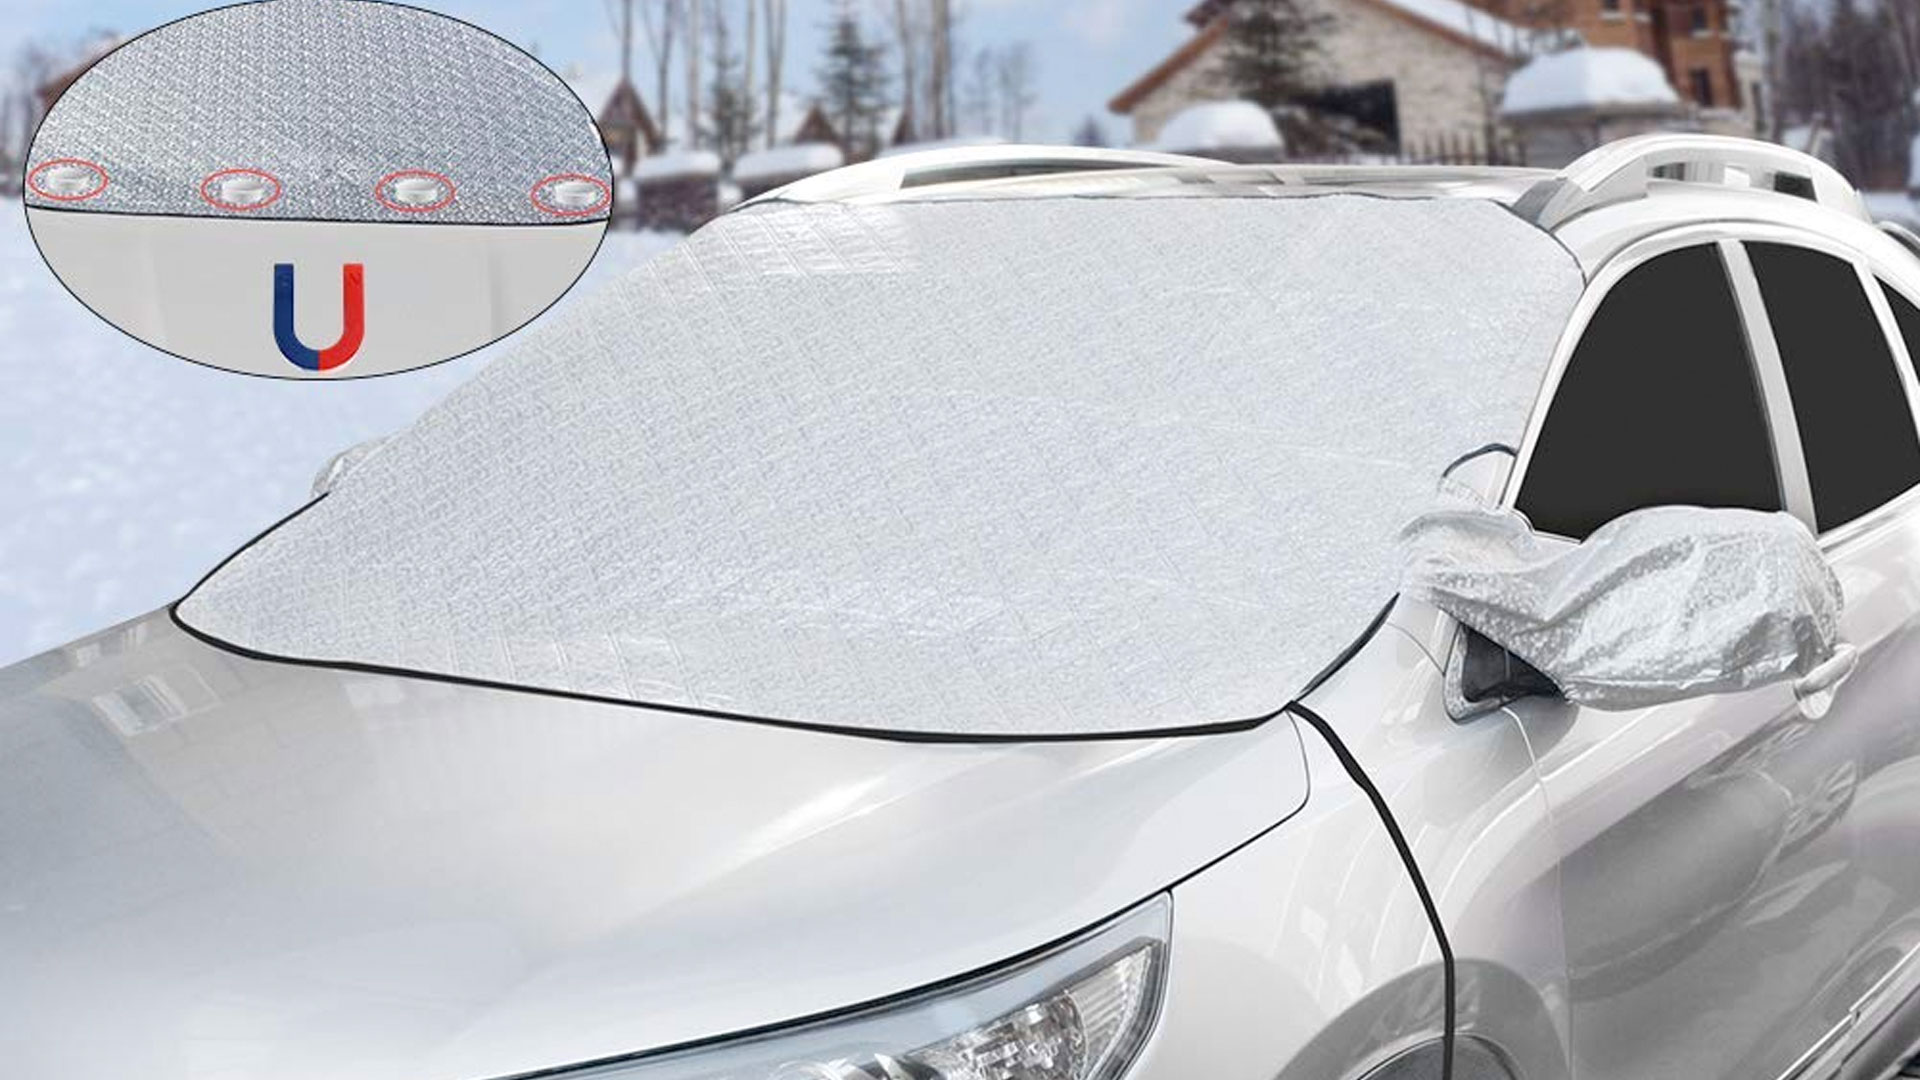 Keep the snow off your car with this windshield cover for just $12